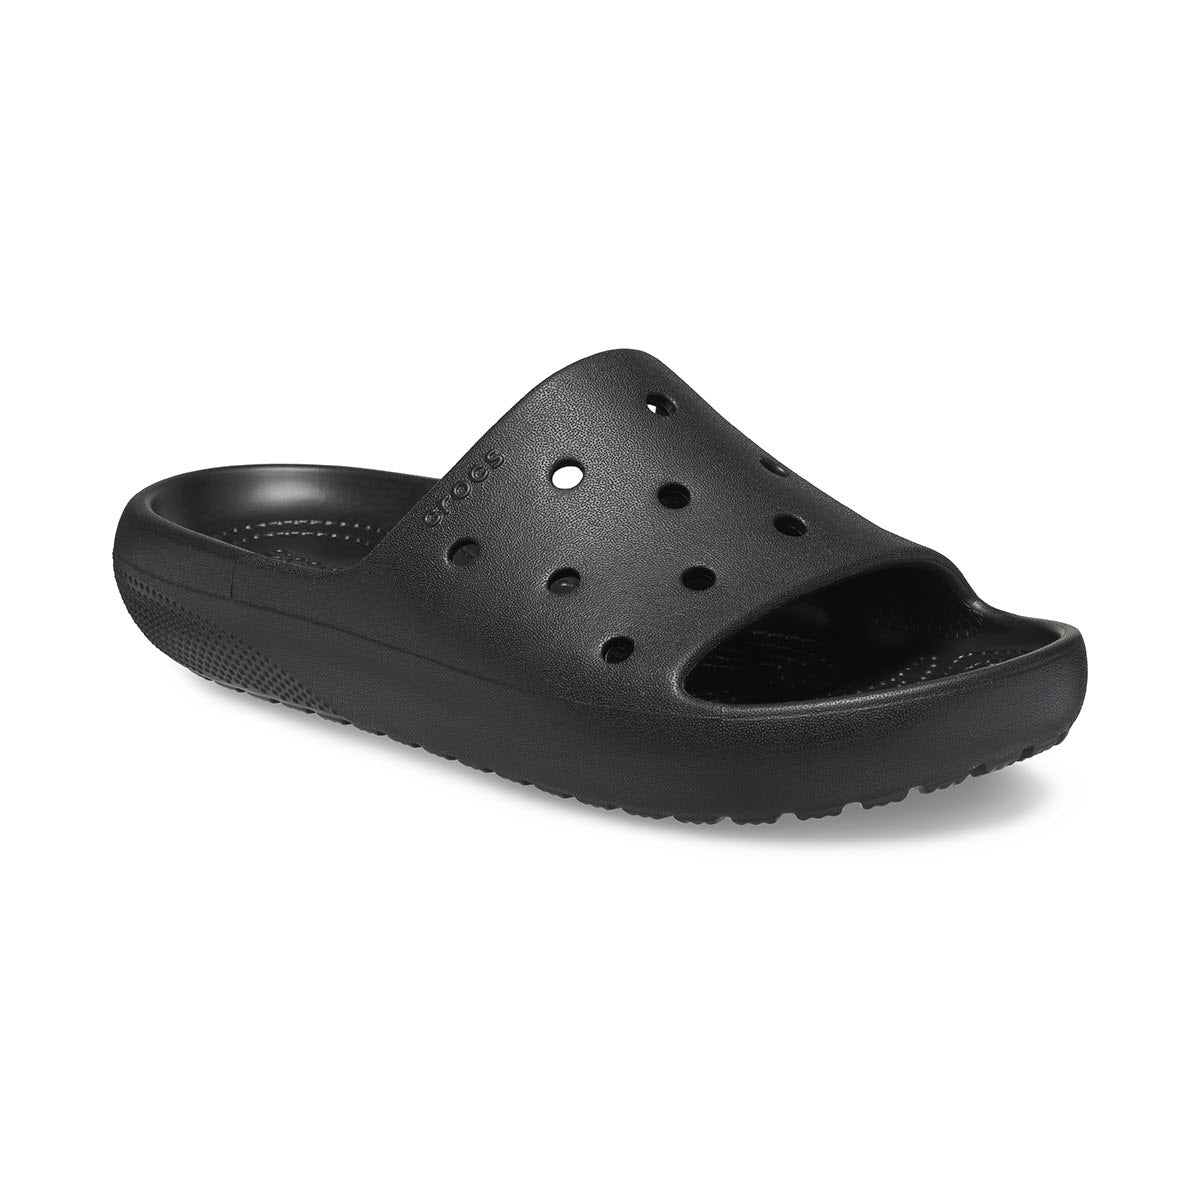 A single black Classic Croc Slide V2 sandal from the Crocs Collection, with multiple circular perforations and made of a rubber-like material, displayed on a white background.